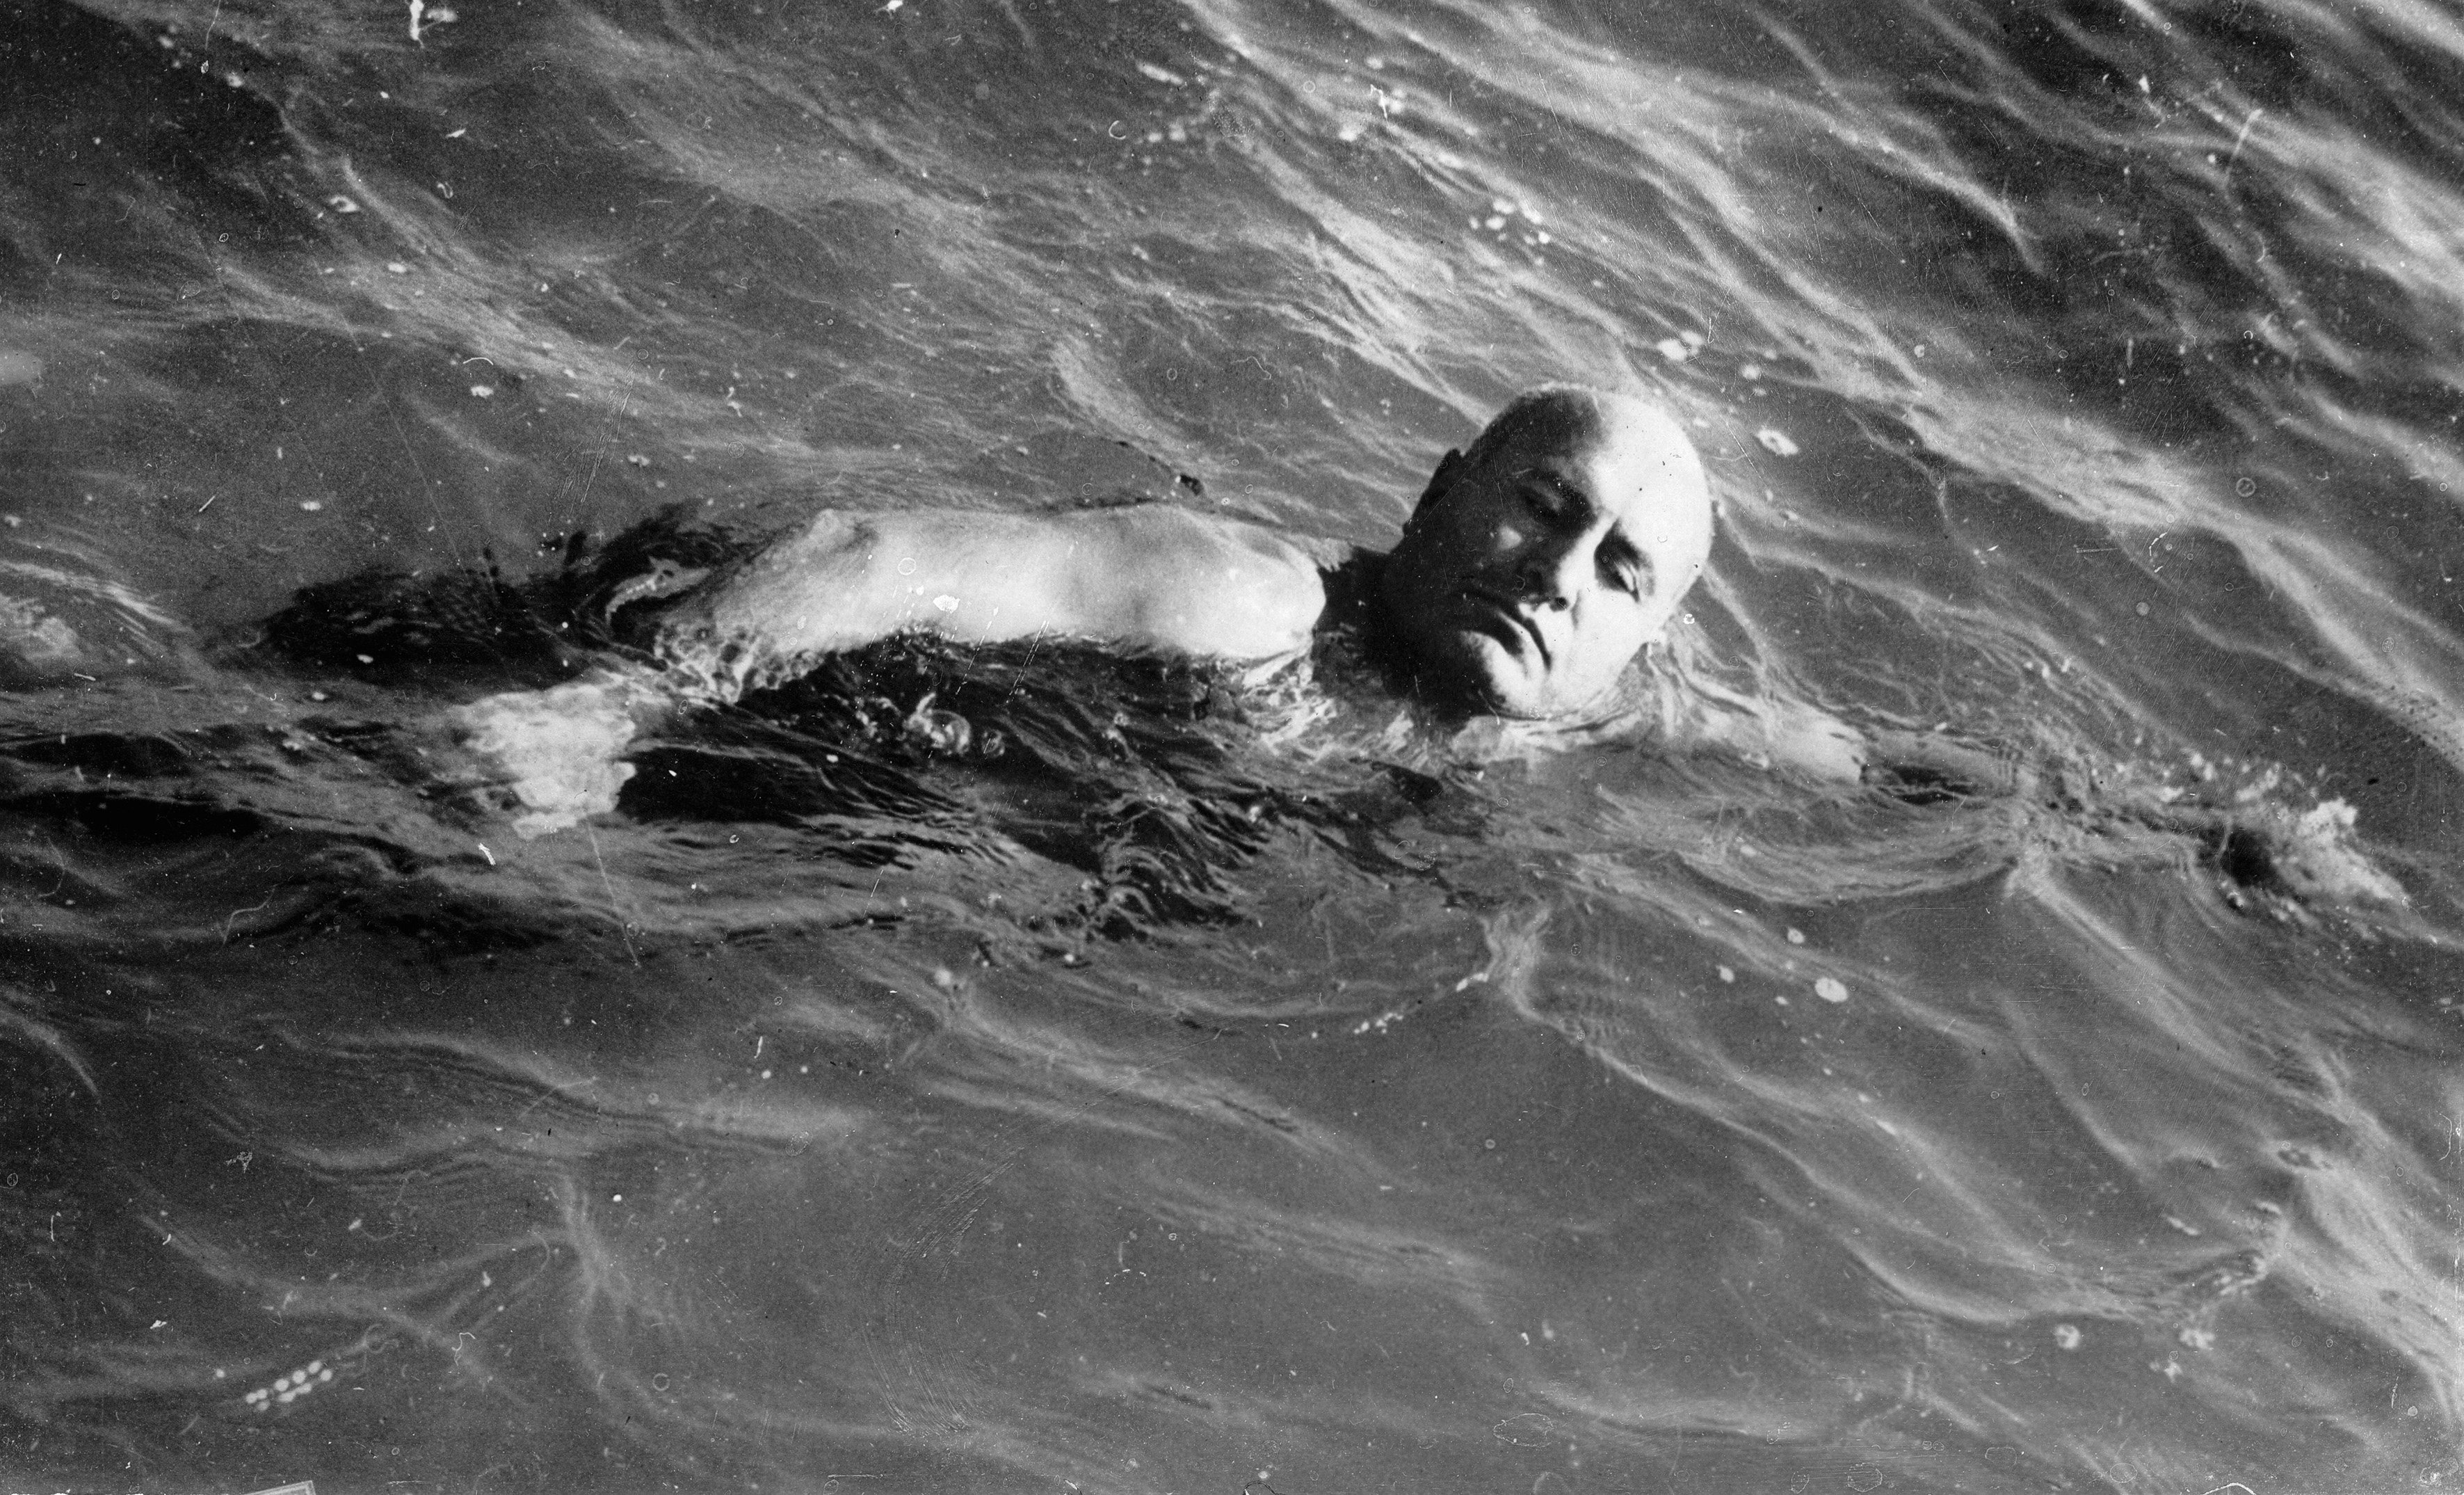 Benito Mussolini swims in Rom. Photograph. November 2nd 1934. (Photo by Imagno/Getty Images) Benito Mussolini beim Schwimmen. Photographie. 2.11.1934.